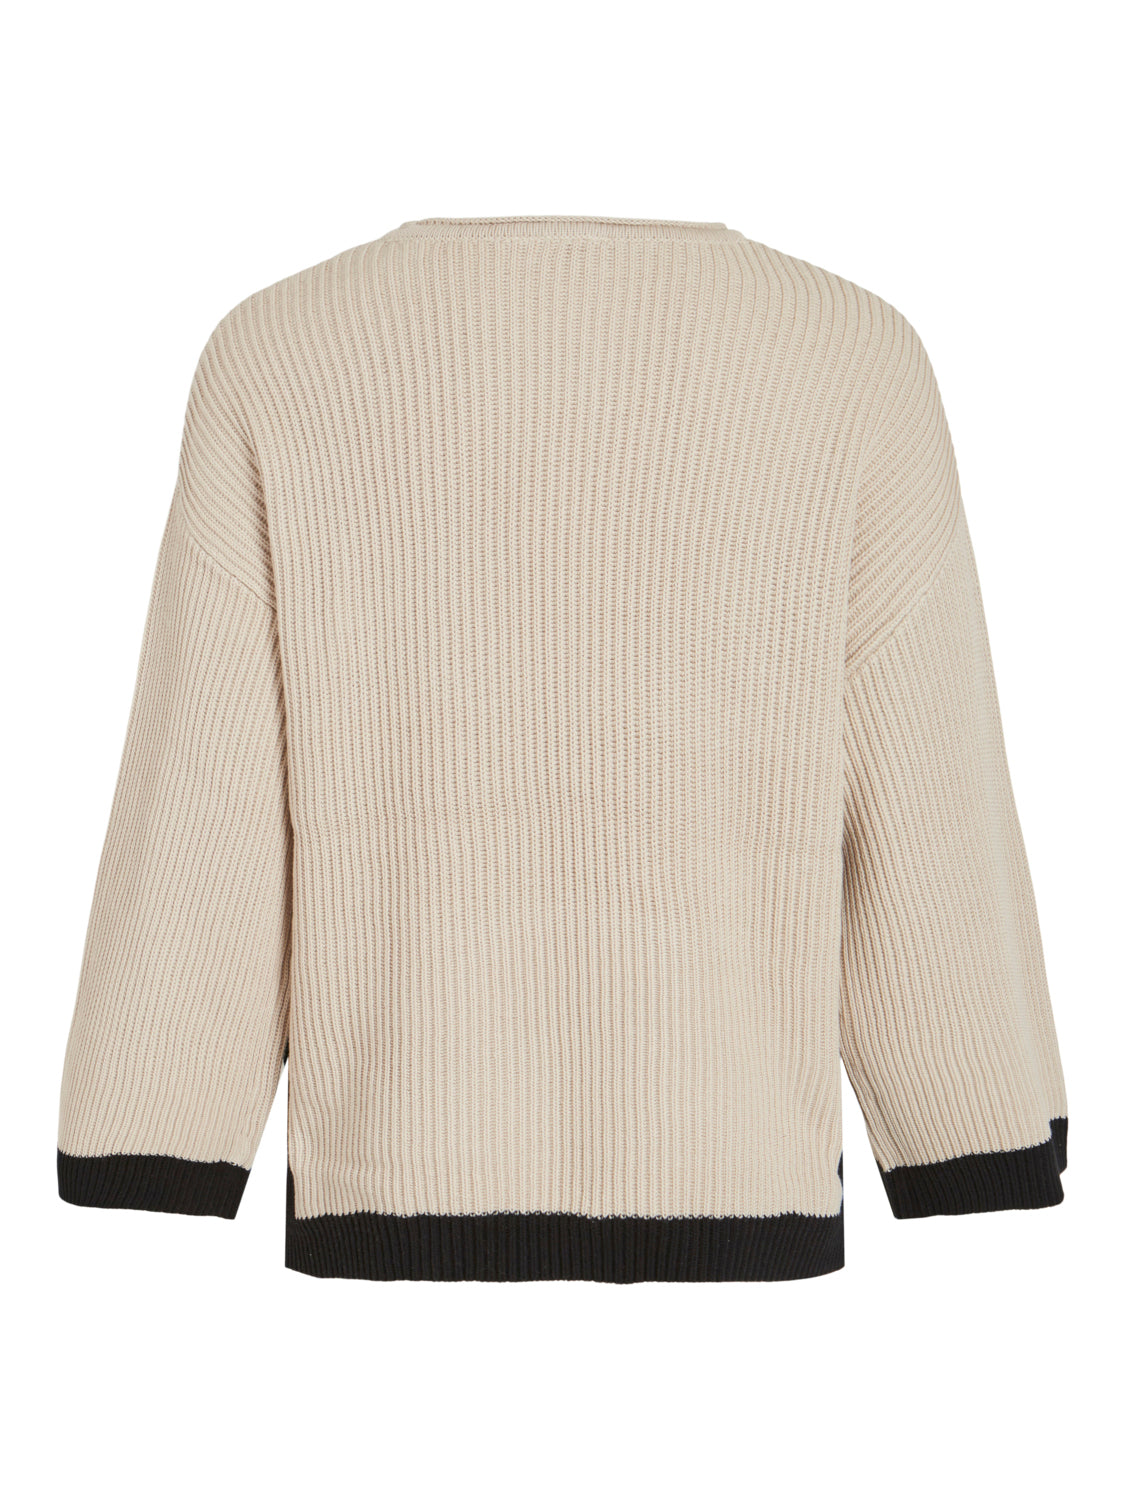 VICHING Pullover - Oatmeal